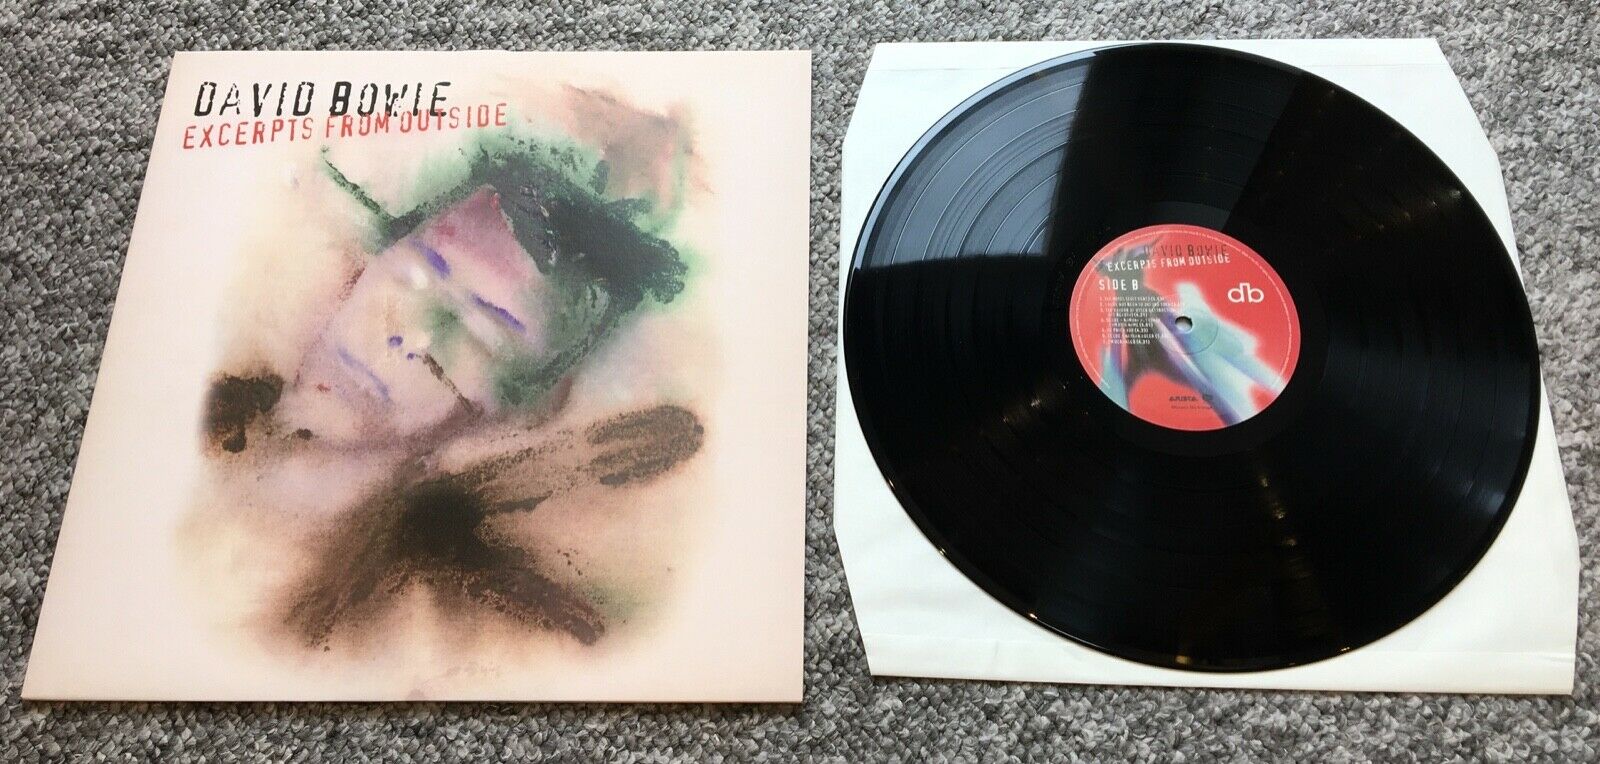 popsike.com - DAVID BOWIE - 'Excerpts From Outside' Vinyl LP 